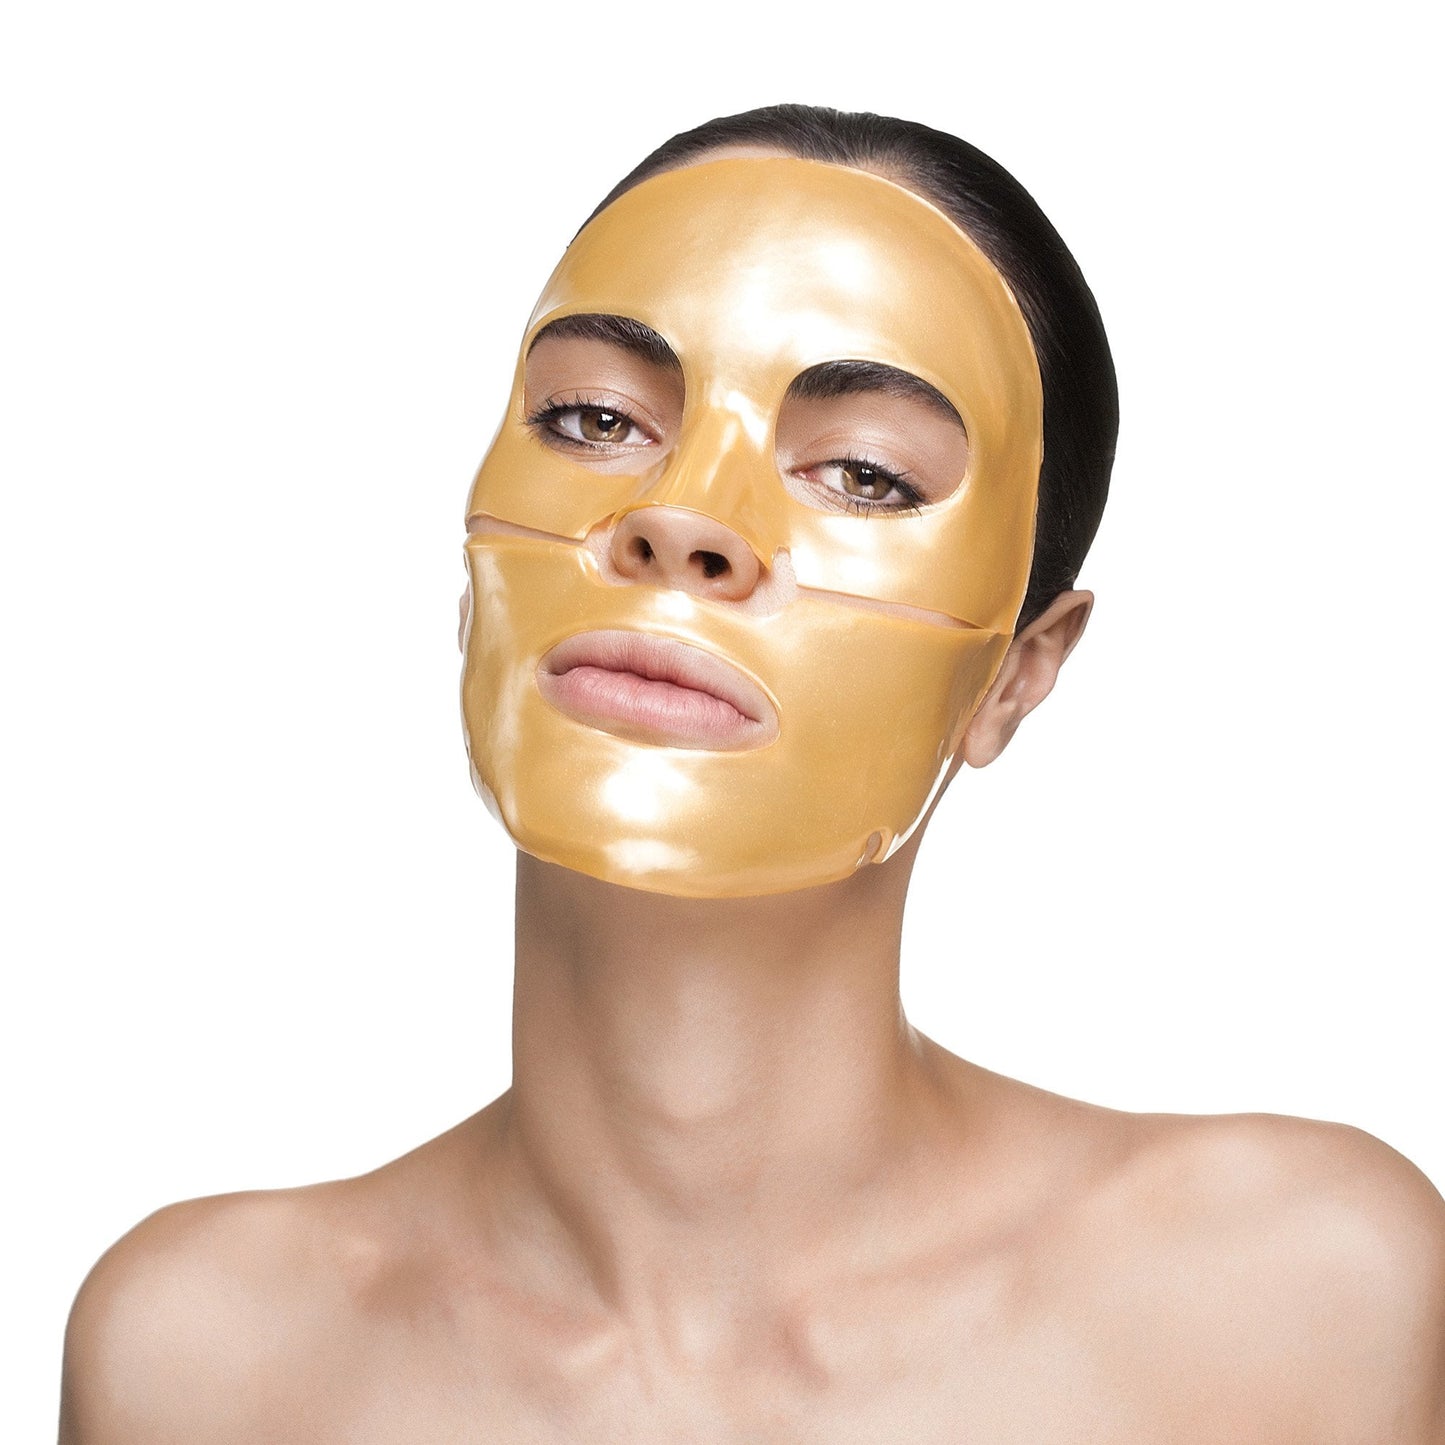 Buy Online Best Nanogold Face Masks - 4 Treatments | Buy innovative clinical skincare products - TOPBODY